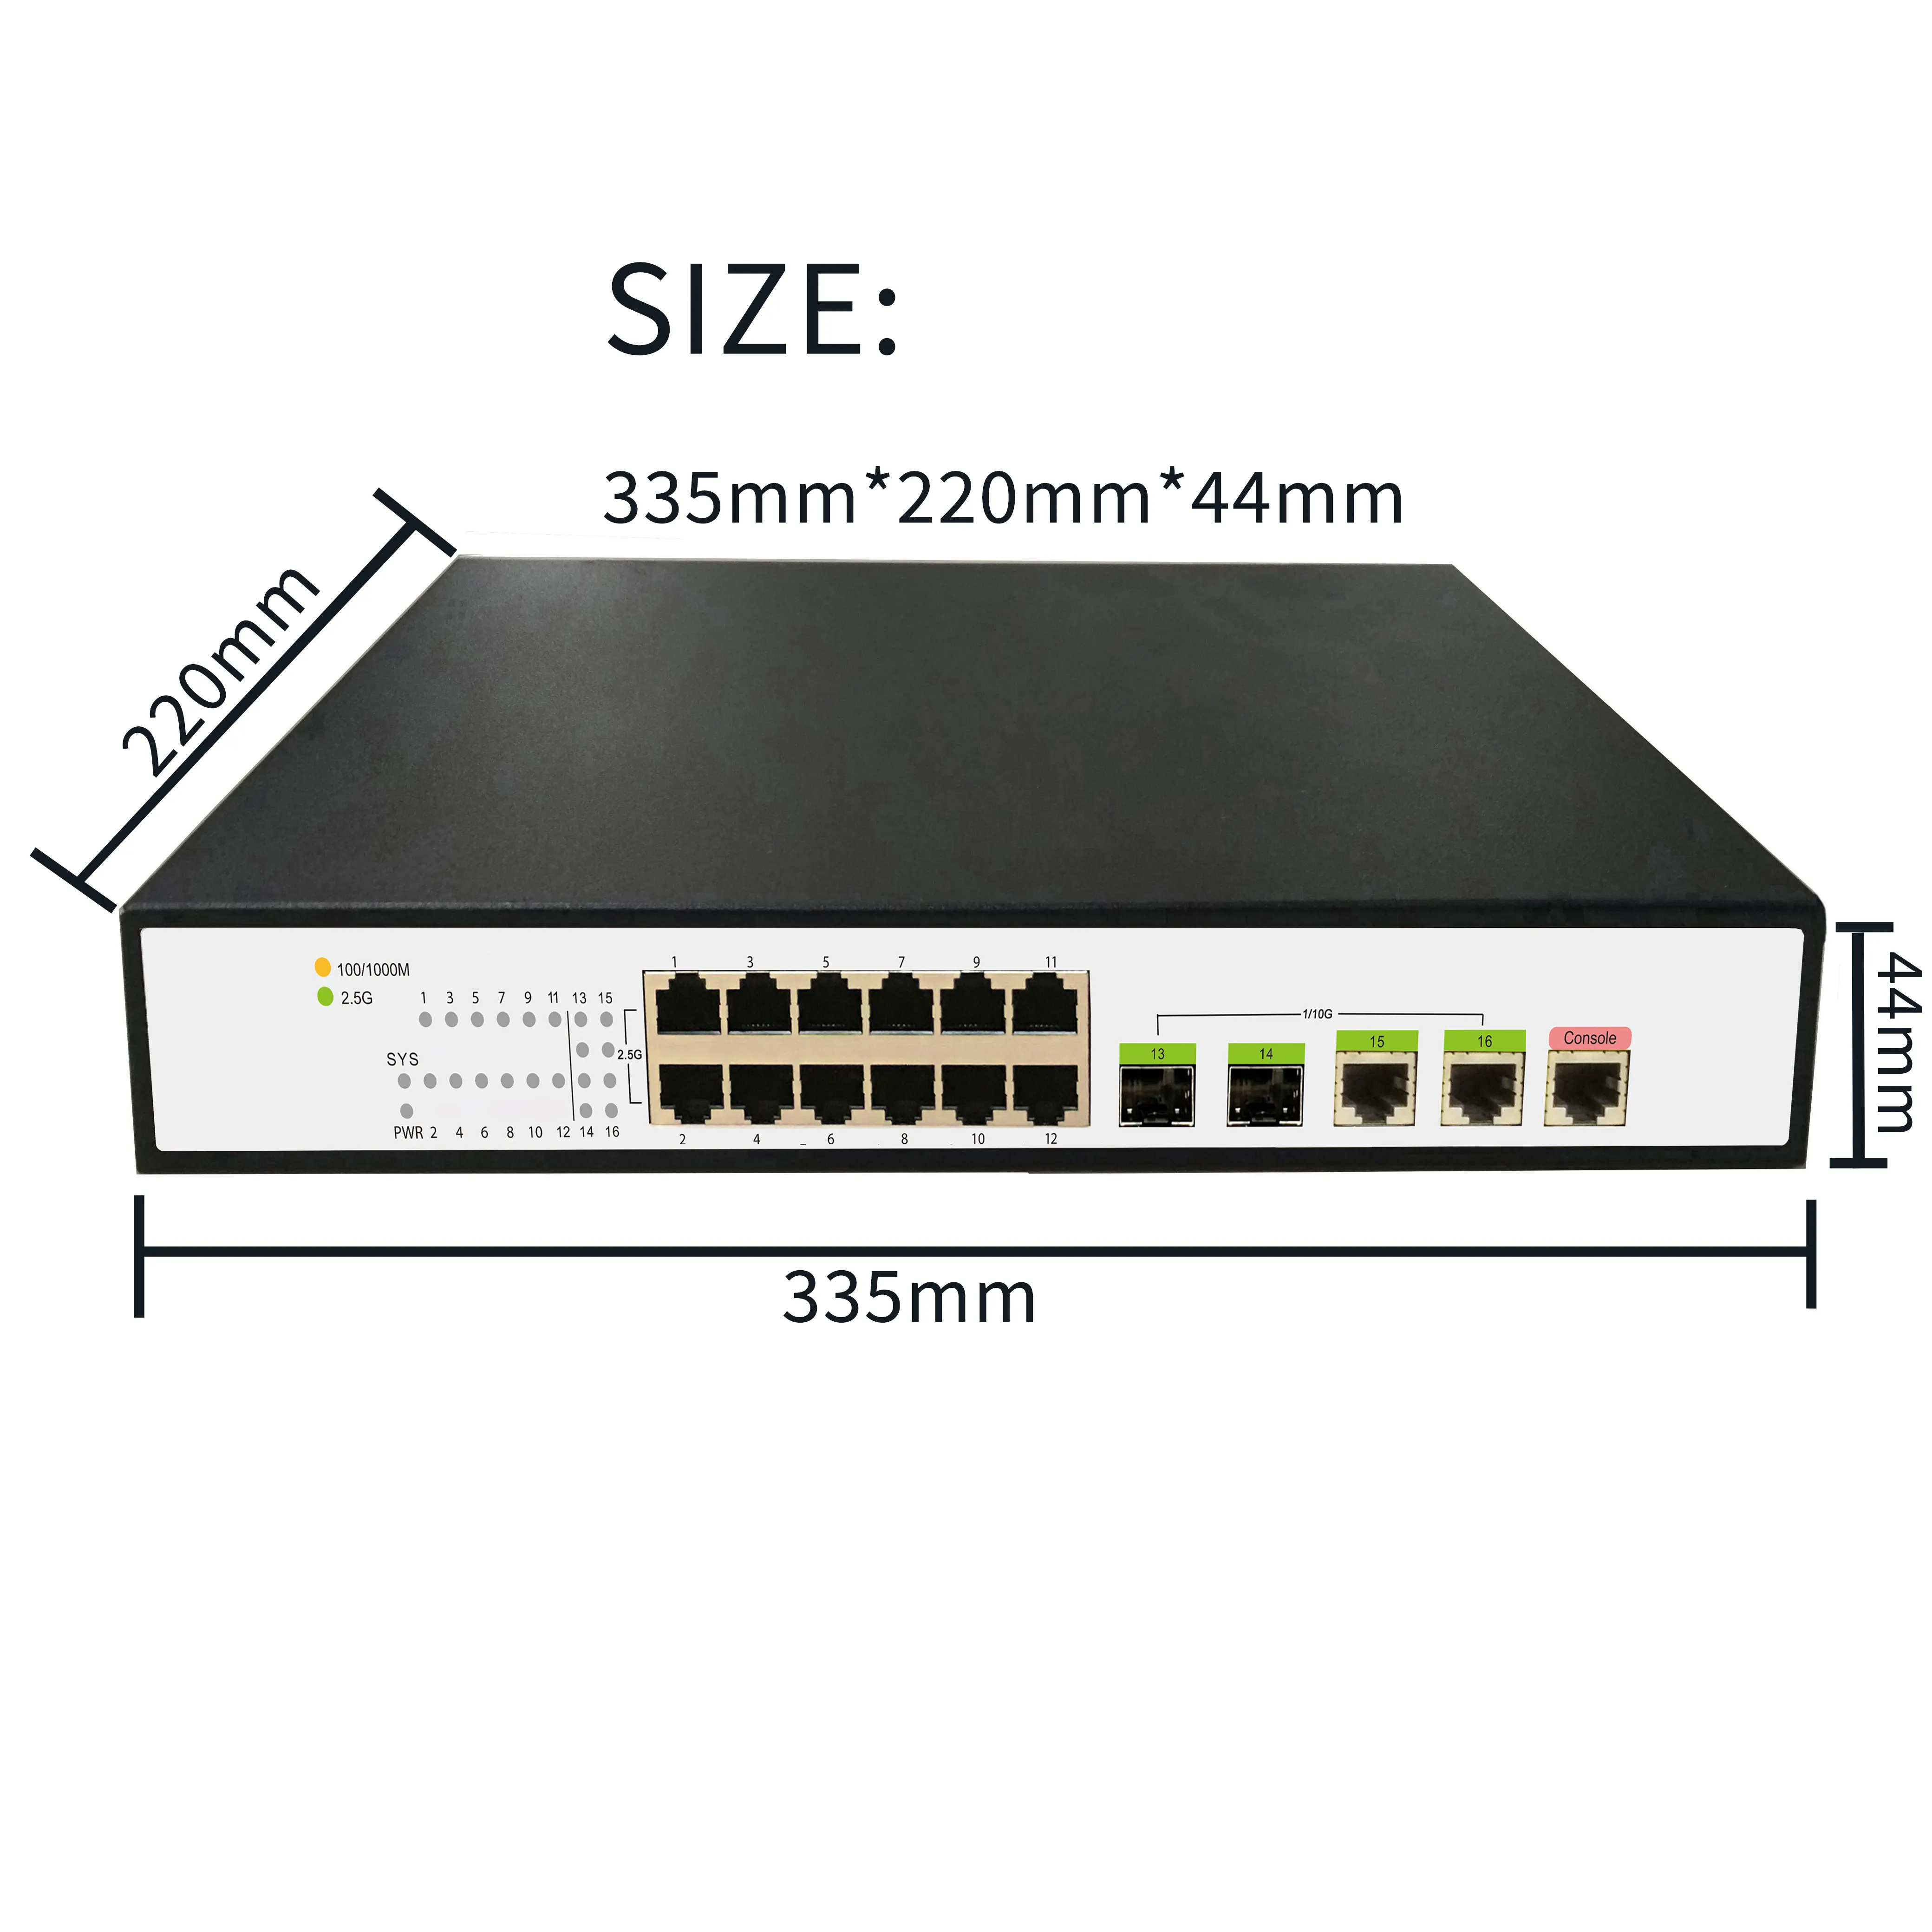 2*10G SFP+ 12 Port Managed Network Switch 2.5G L2 Rate SNMP and QoS Function